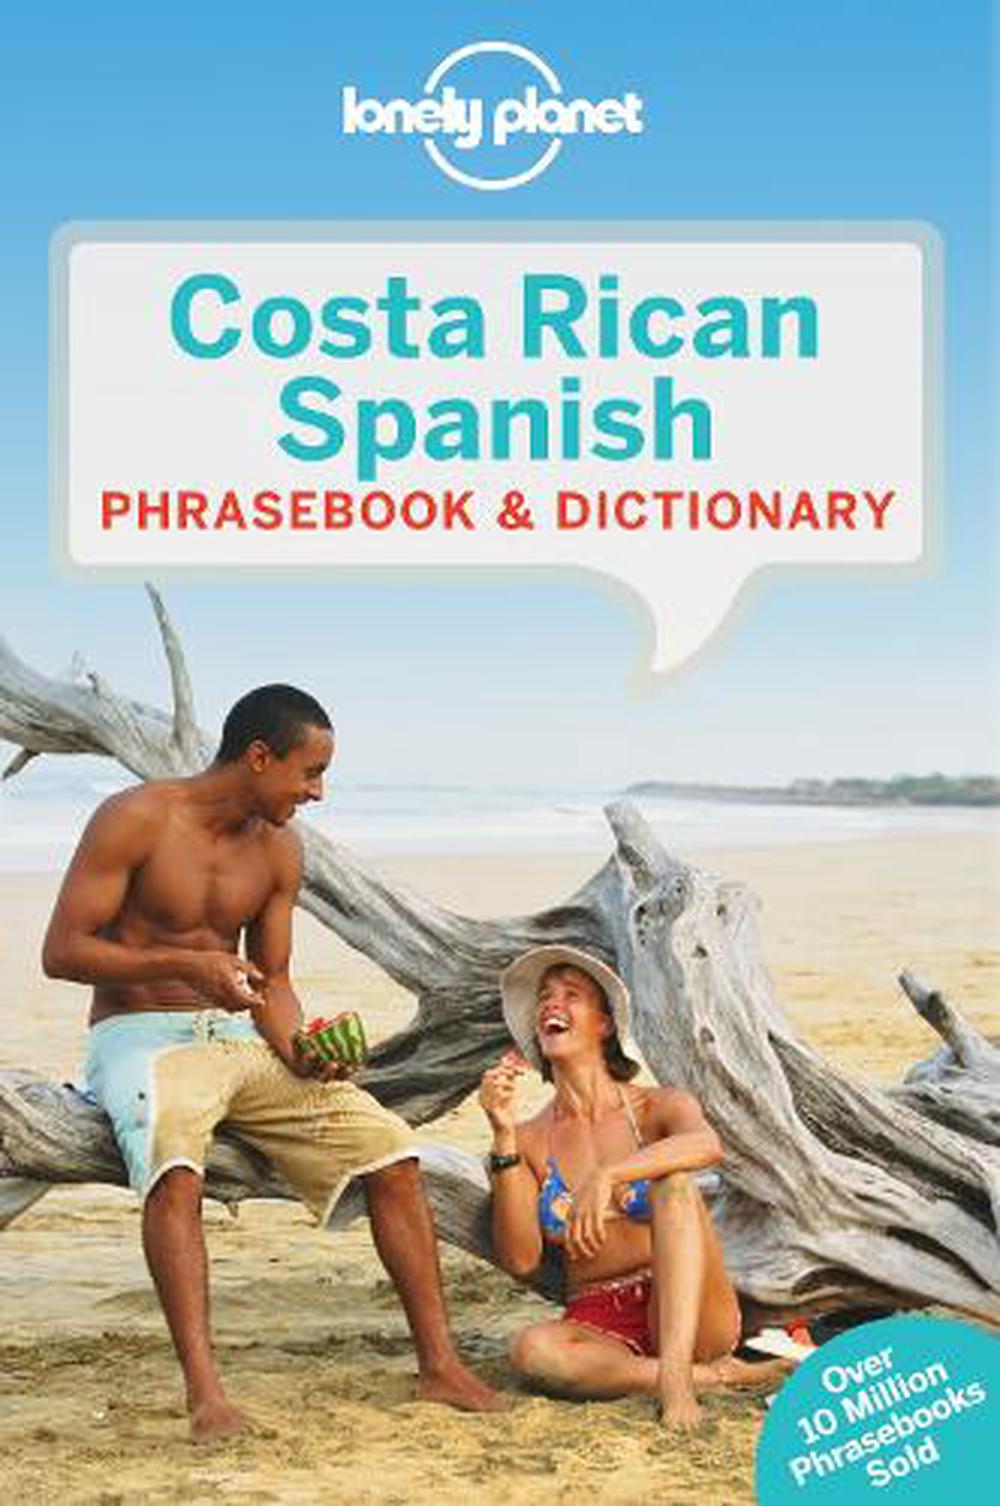 Lonely　online　Dictionary　Costa　Lonely　Planet　Nile　9781786574176　Buy　Planet,　Phrasebook　Rican　by　Spanish　Paperback,　at　The